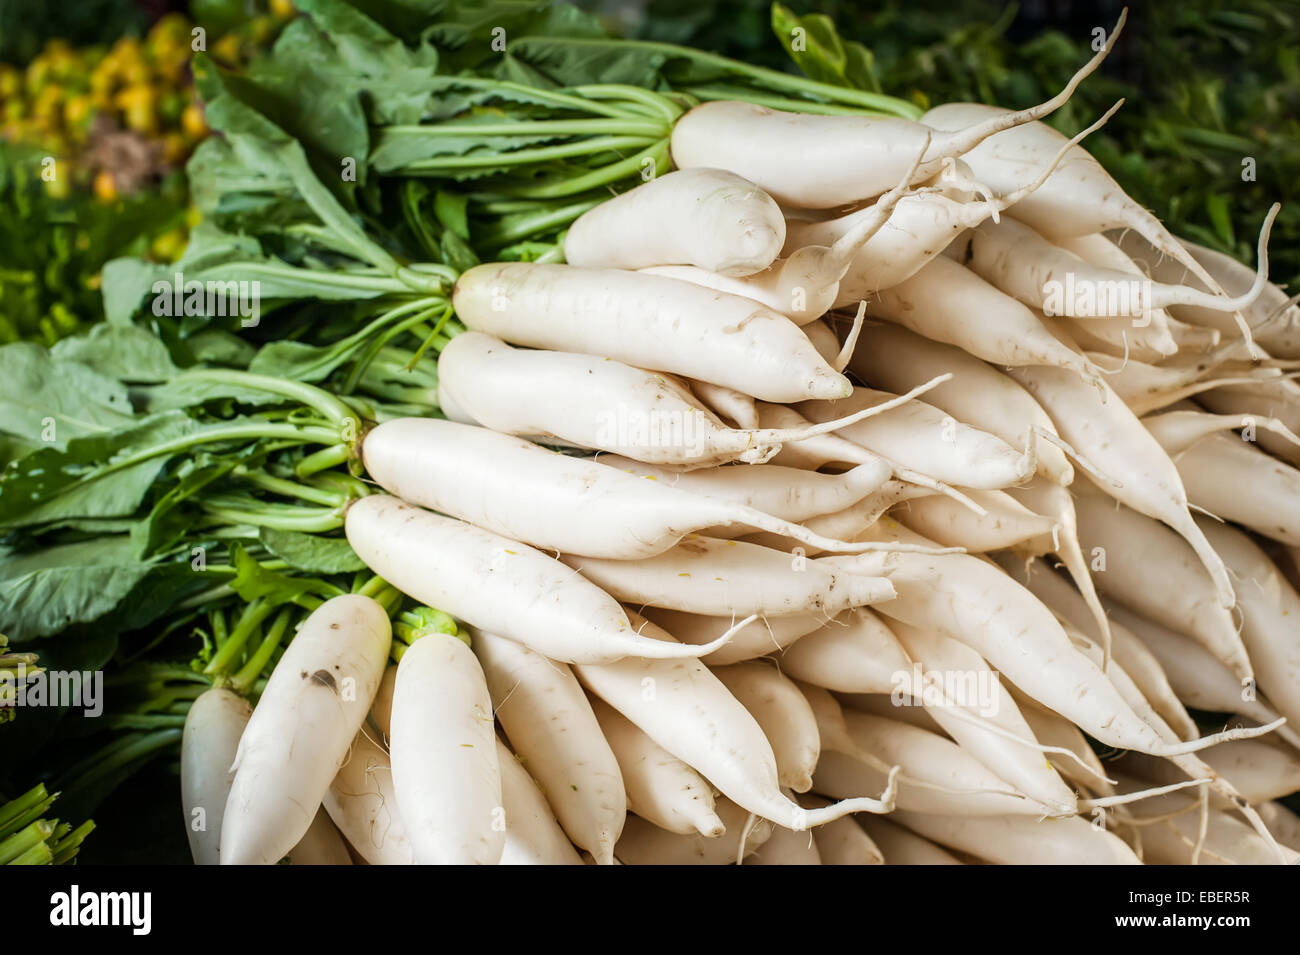 Organic local daikon radish vegetables for sale at outdoor asian marketplace Stock Photo